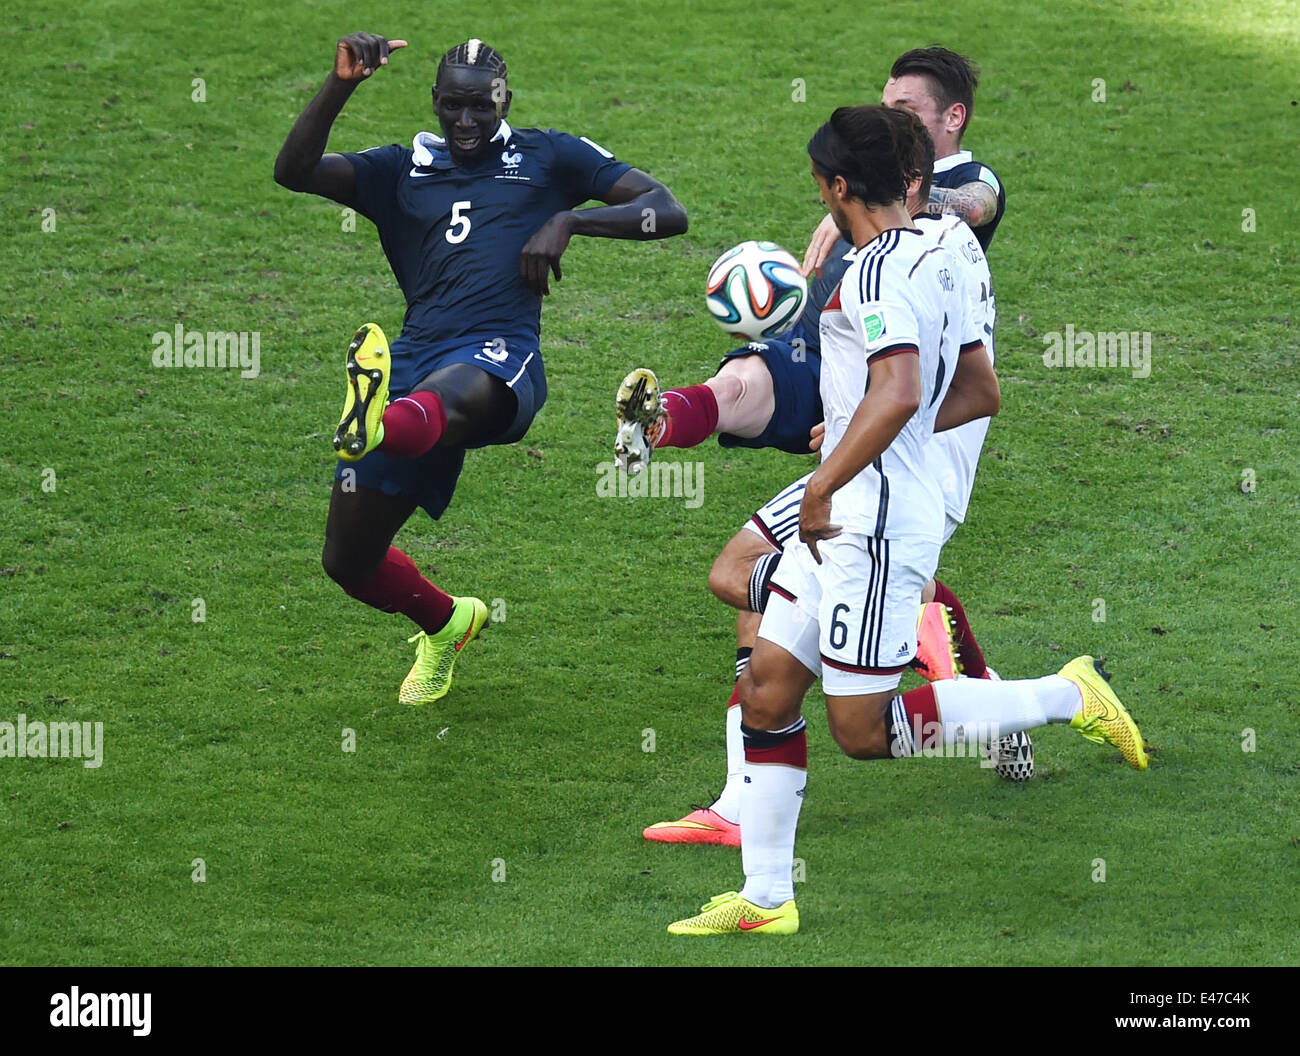 Rio de Janeiro, Brazil. 04th July, 2014. Mamadou Sakho (L) of France and Sami Khedira (R) of Germany vie for the ball during the FIFA World Cup 2014 quarter final soccer match between France and Germany at Estadio do Maracana in Rio de Janeiro, Brazil, 04 July 2014. Photo: Marcus Brandt/dpa/Alamy Live News Stock Photo